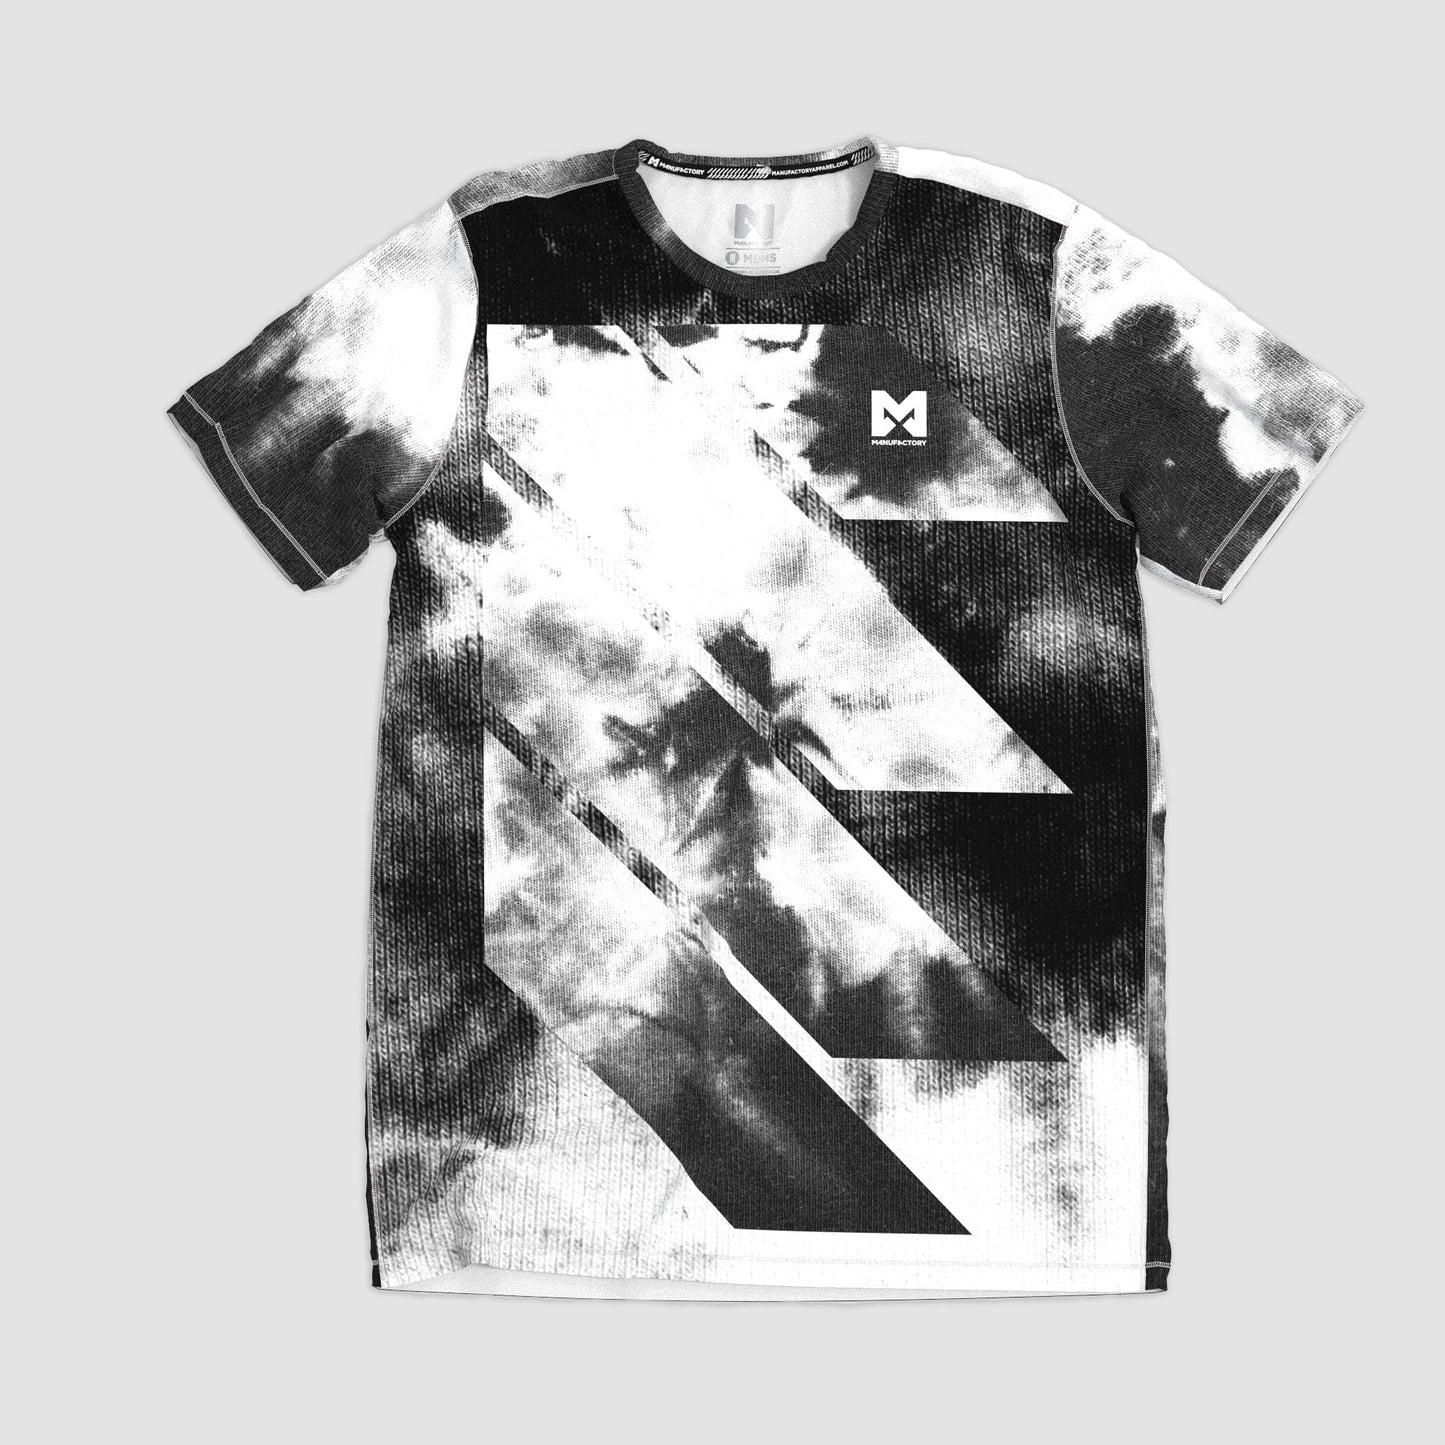 Manufactory Apparel Physical product Black / Small Electrix DryTECH T-Shirt